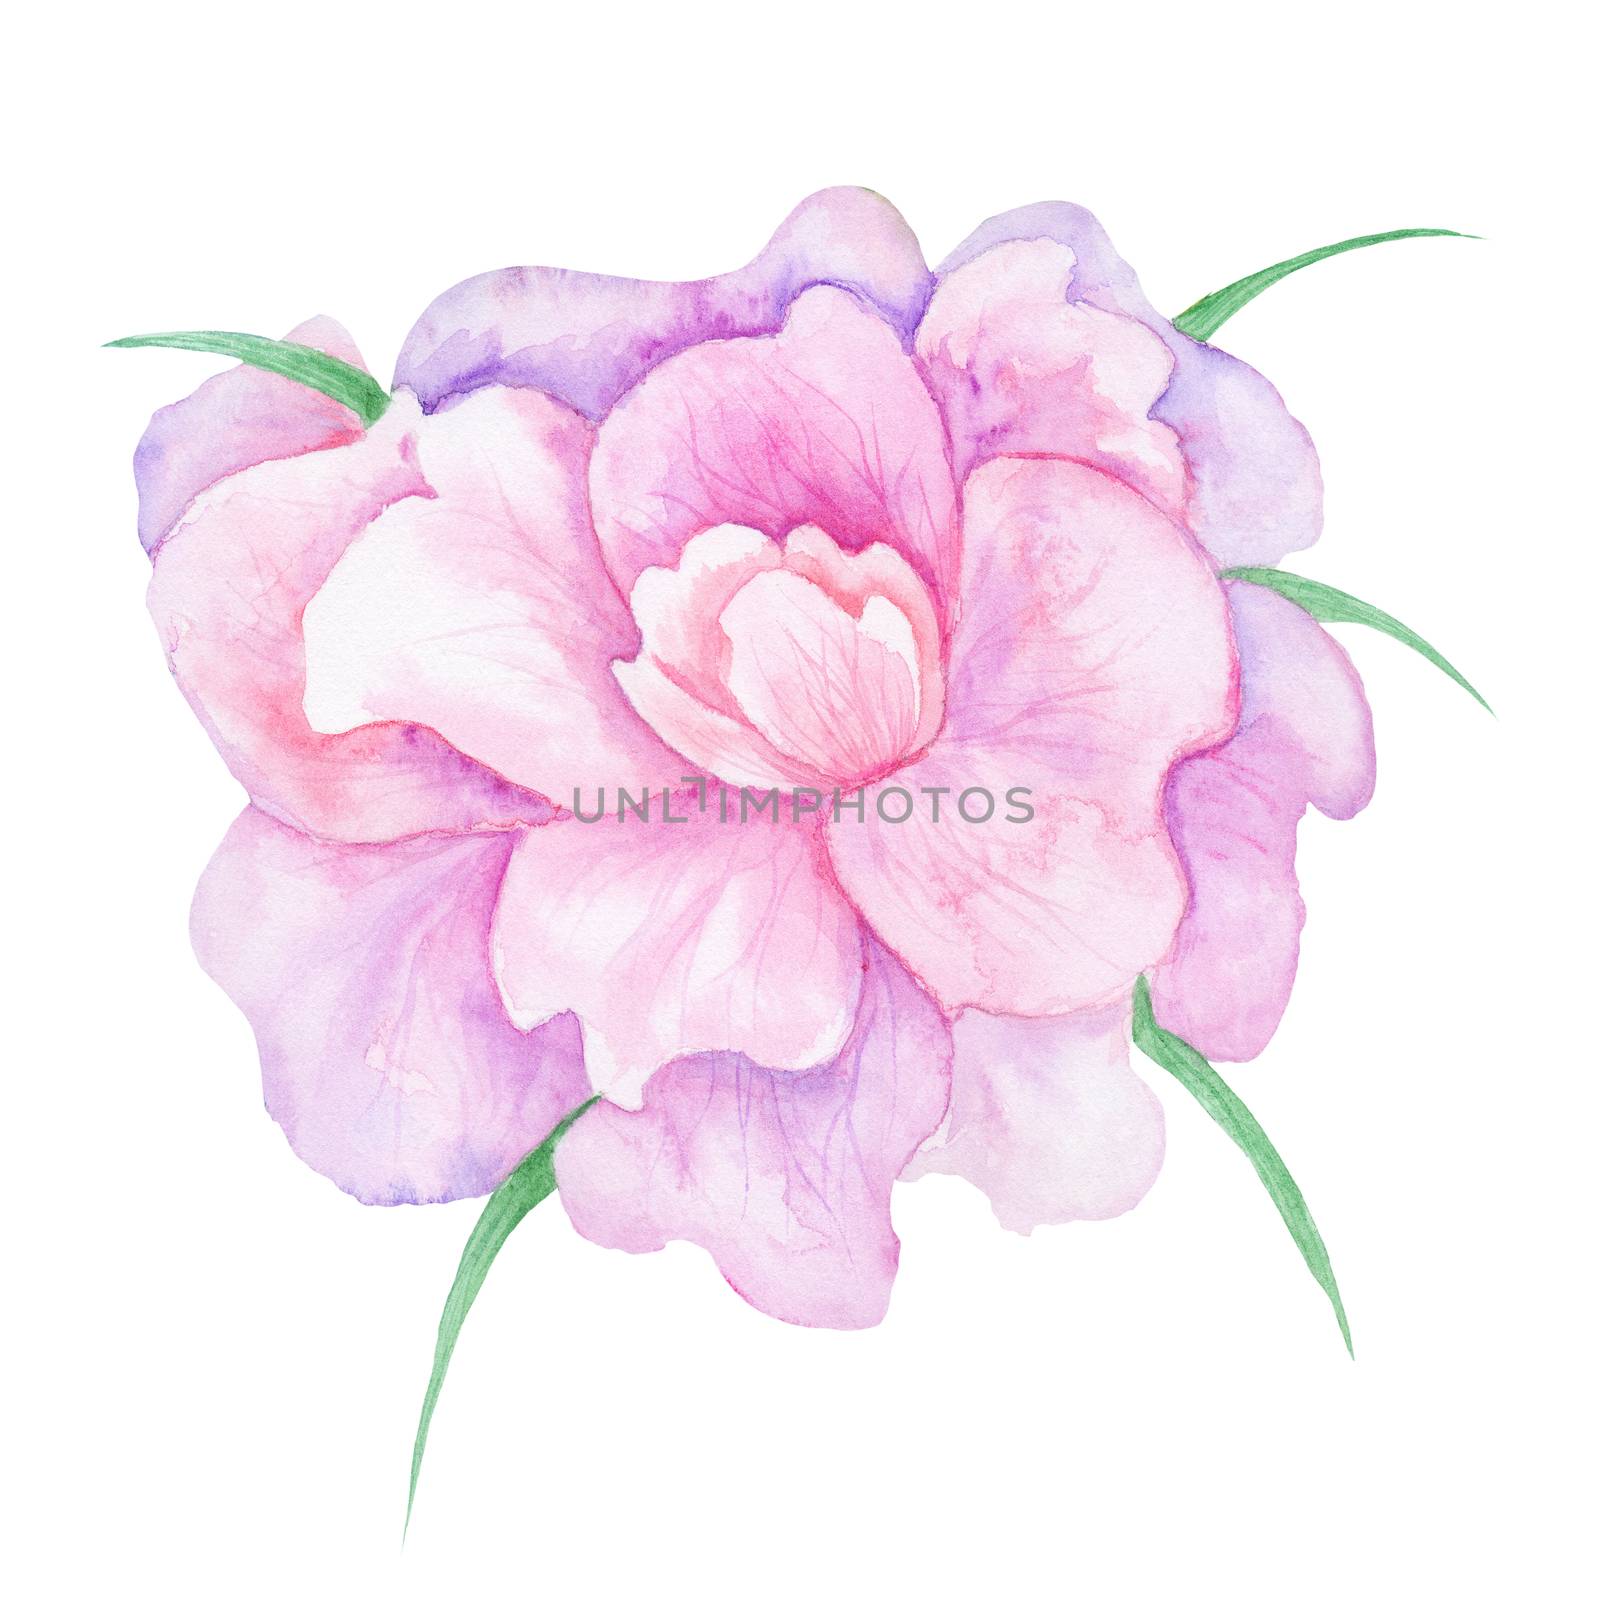 High-quality botanical illustration with tender romantic blossoming rose isolated on white background